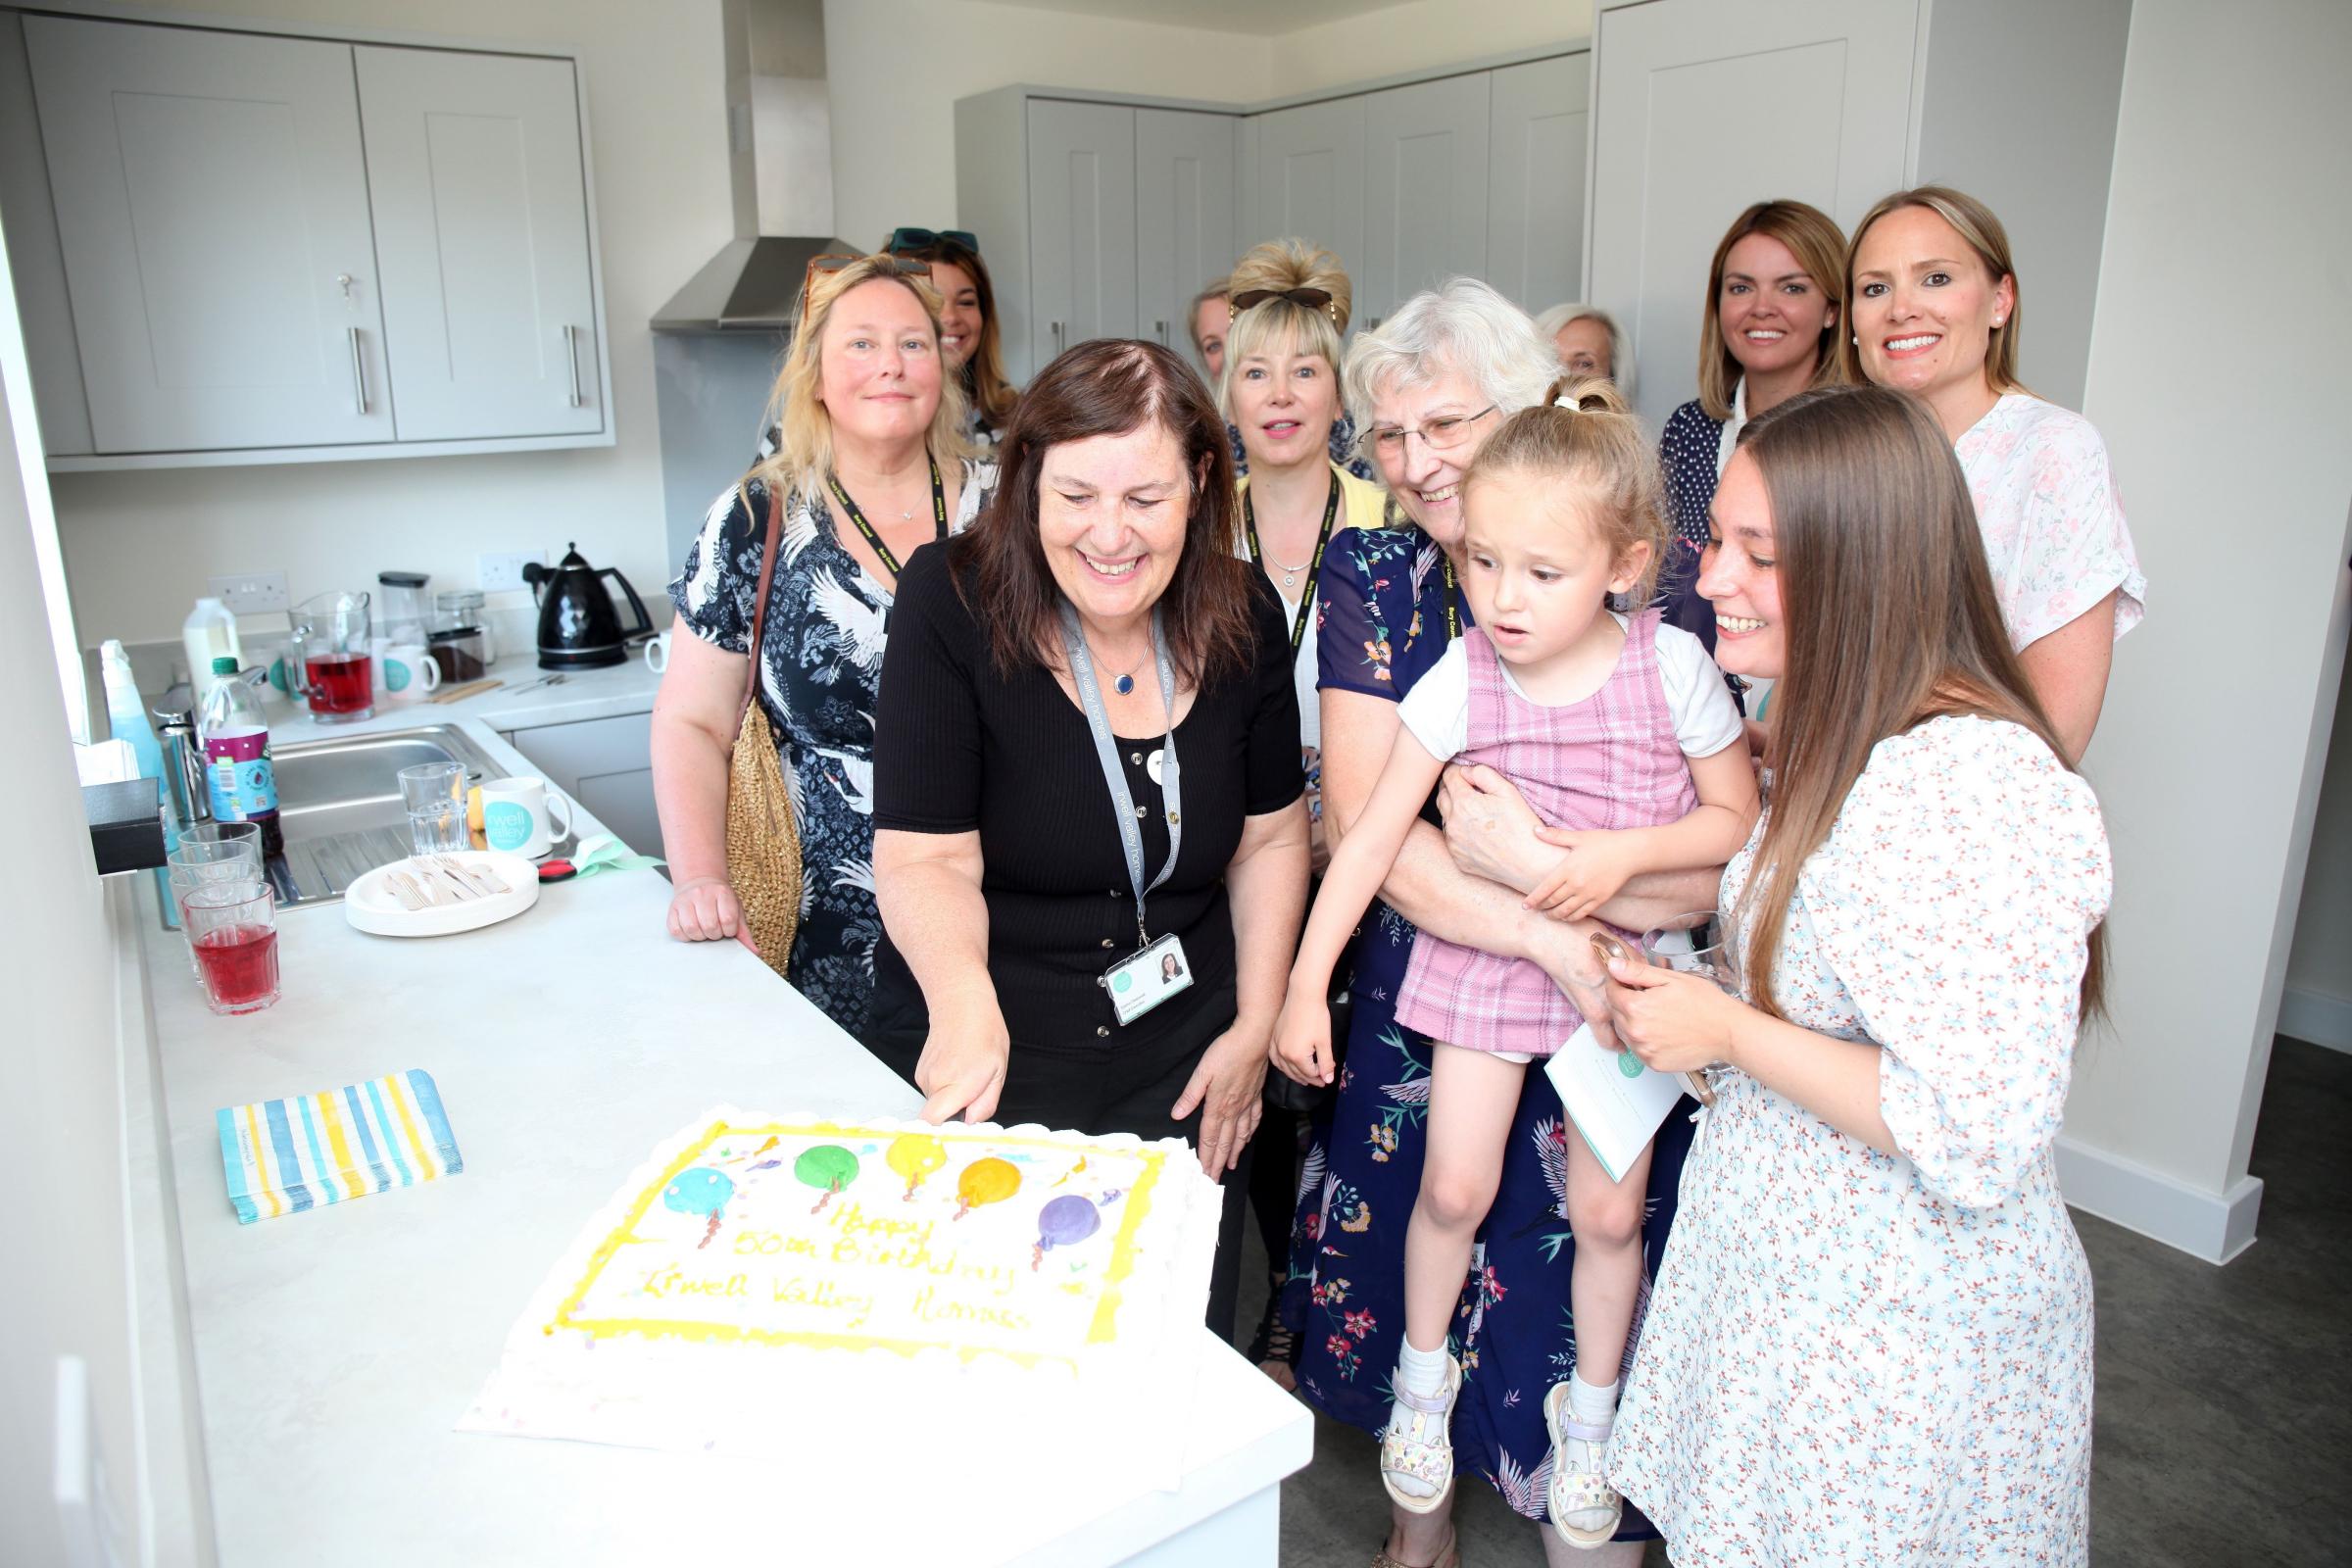 Guests at the launch of Morris Street, Bury, enjoy a birthday cake celebrating 50 years of Irwell Valley Homes